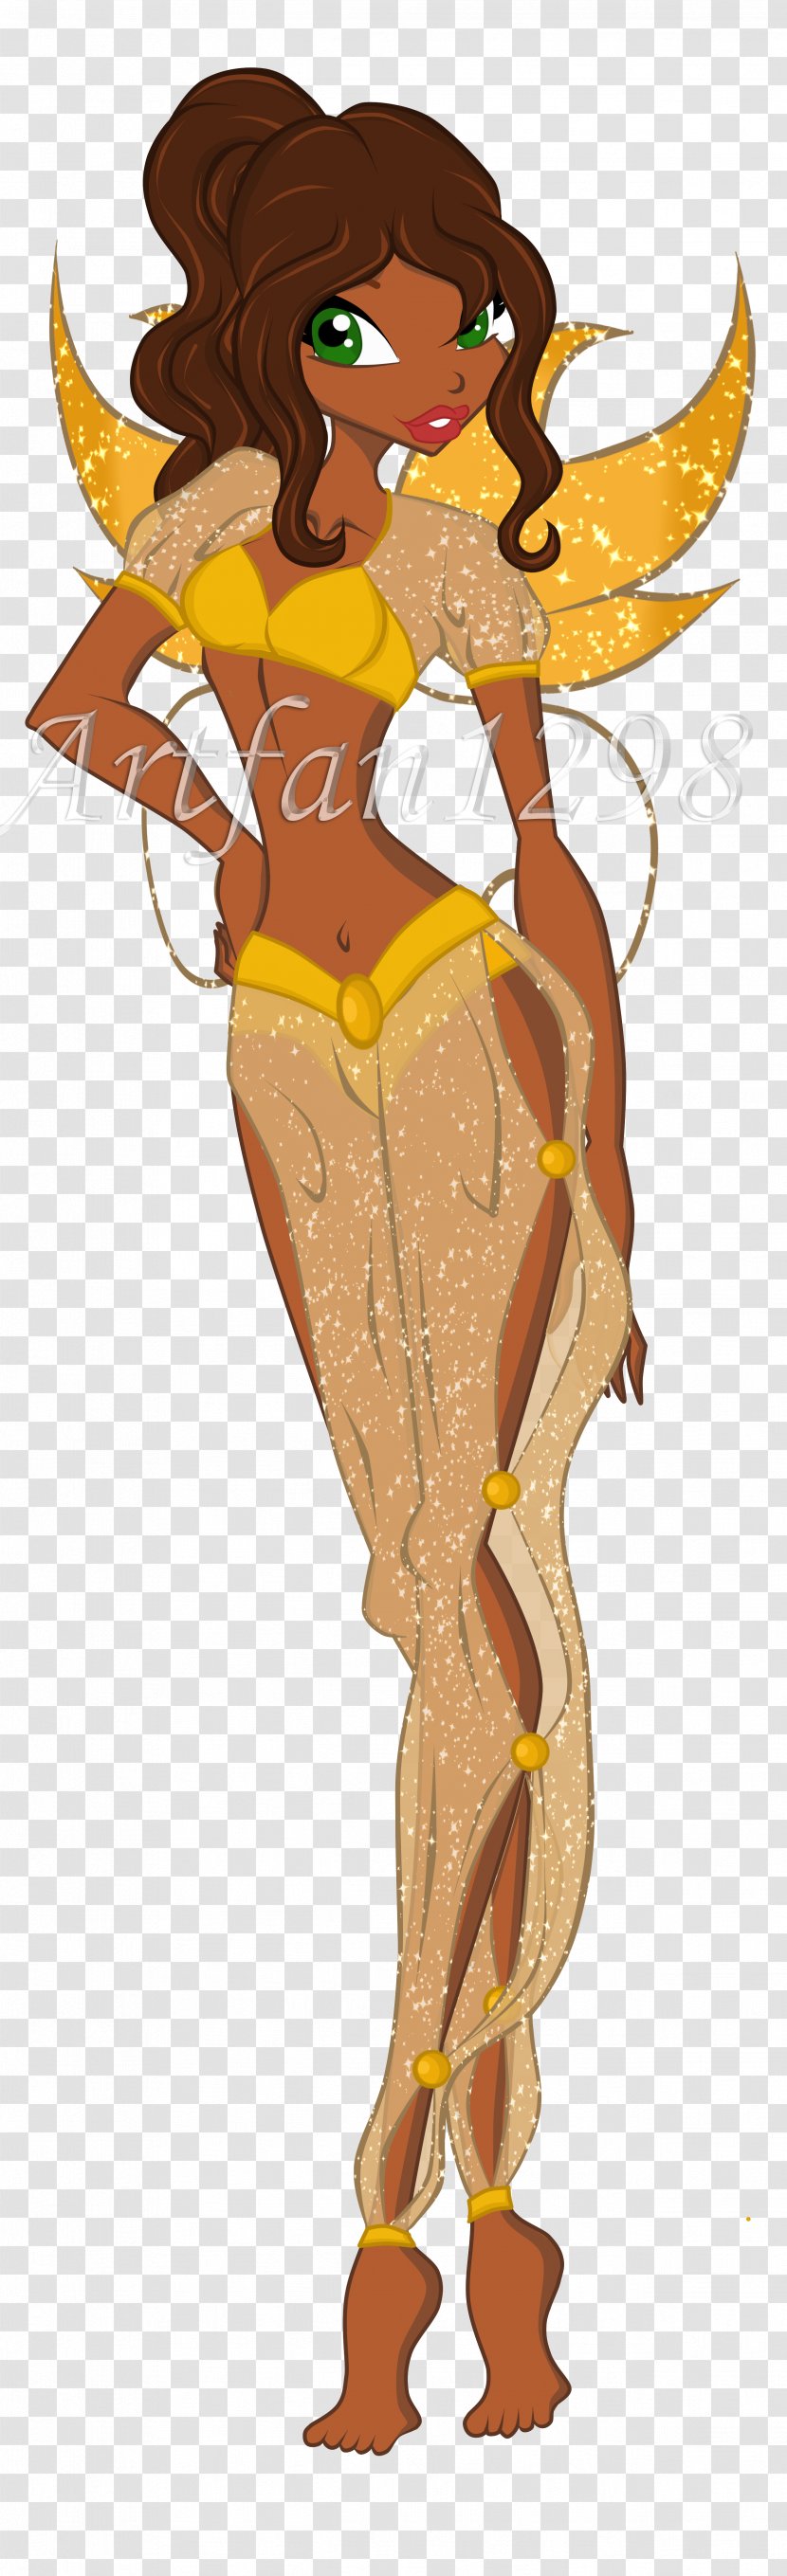 Illustration Fairy Carnivores Cartoon Costume - Fictional Character Transparent PNG